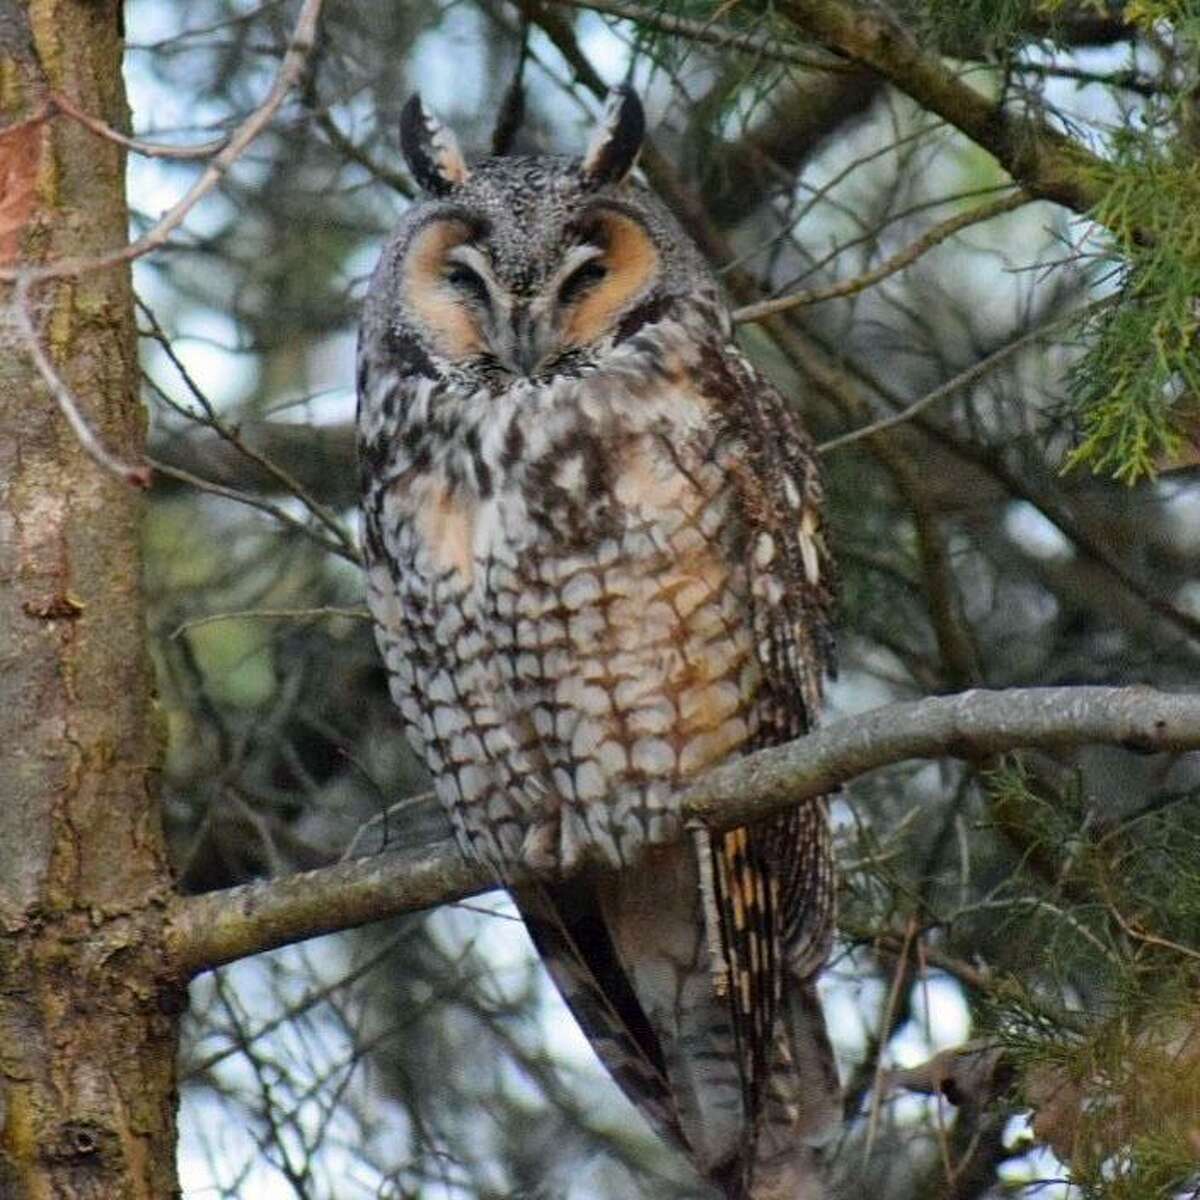 This long-eared owl has been attracting much attention at Greenwich Point.